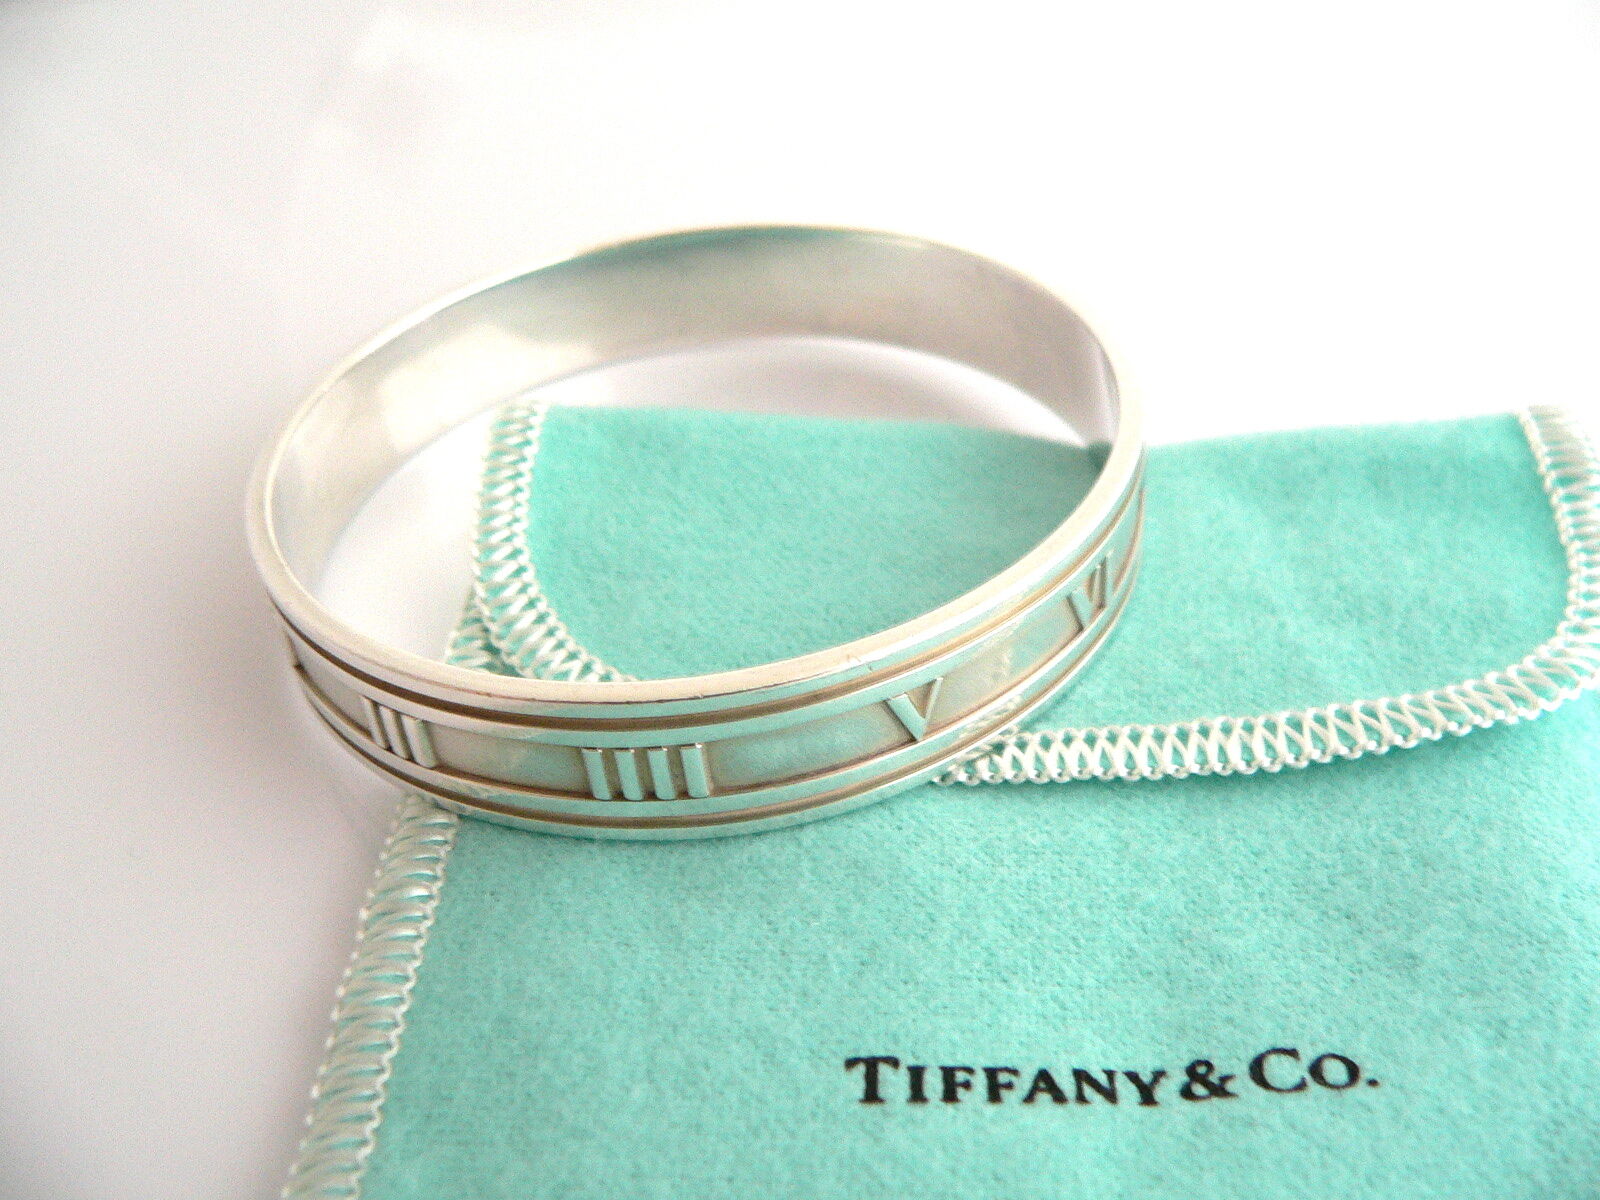 AUTHENTIC Tiffany & Co Ring WIDE Atlas Roman Numerals Ring 